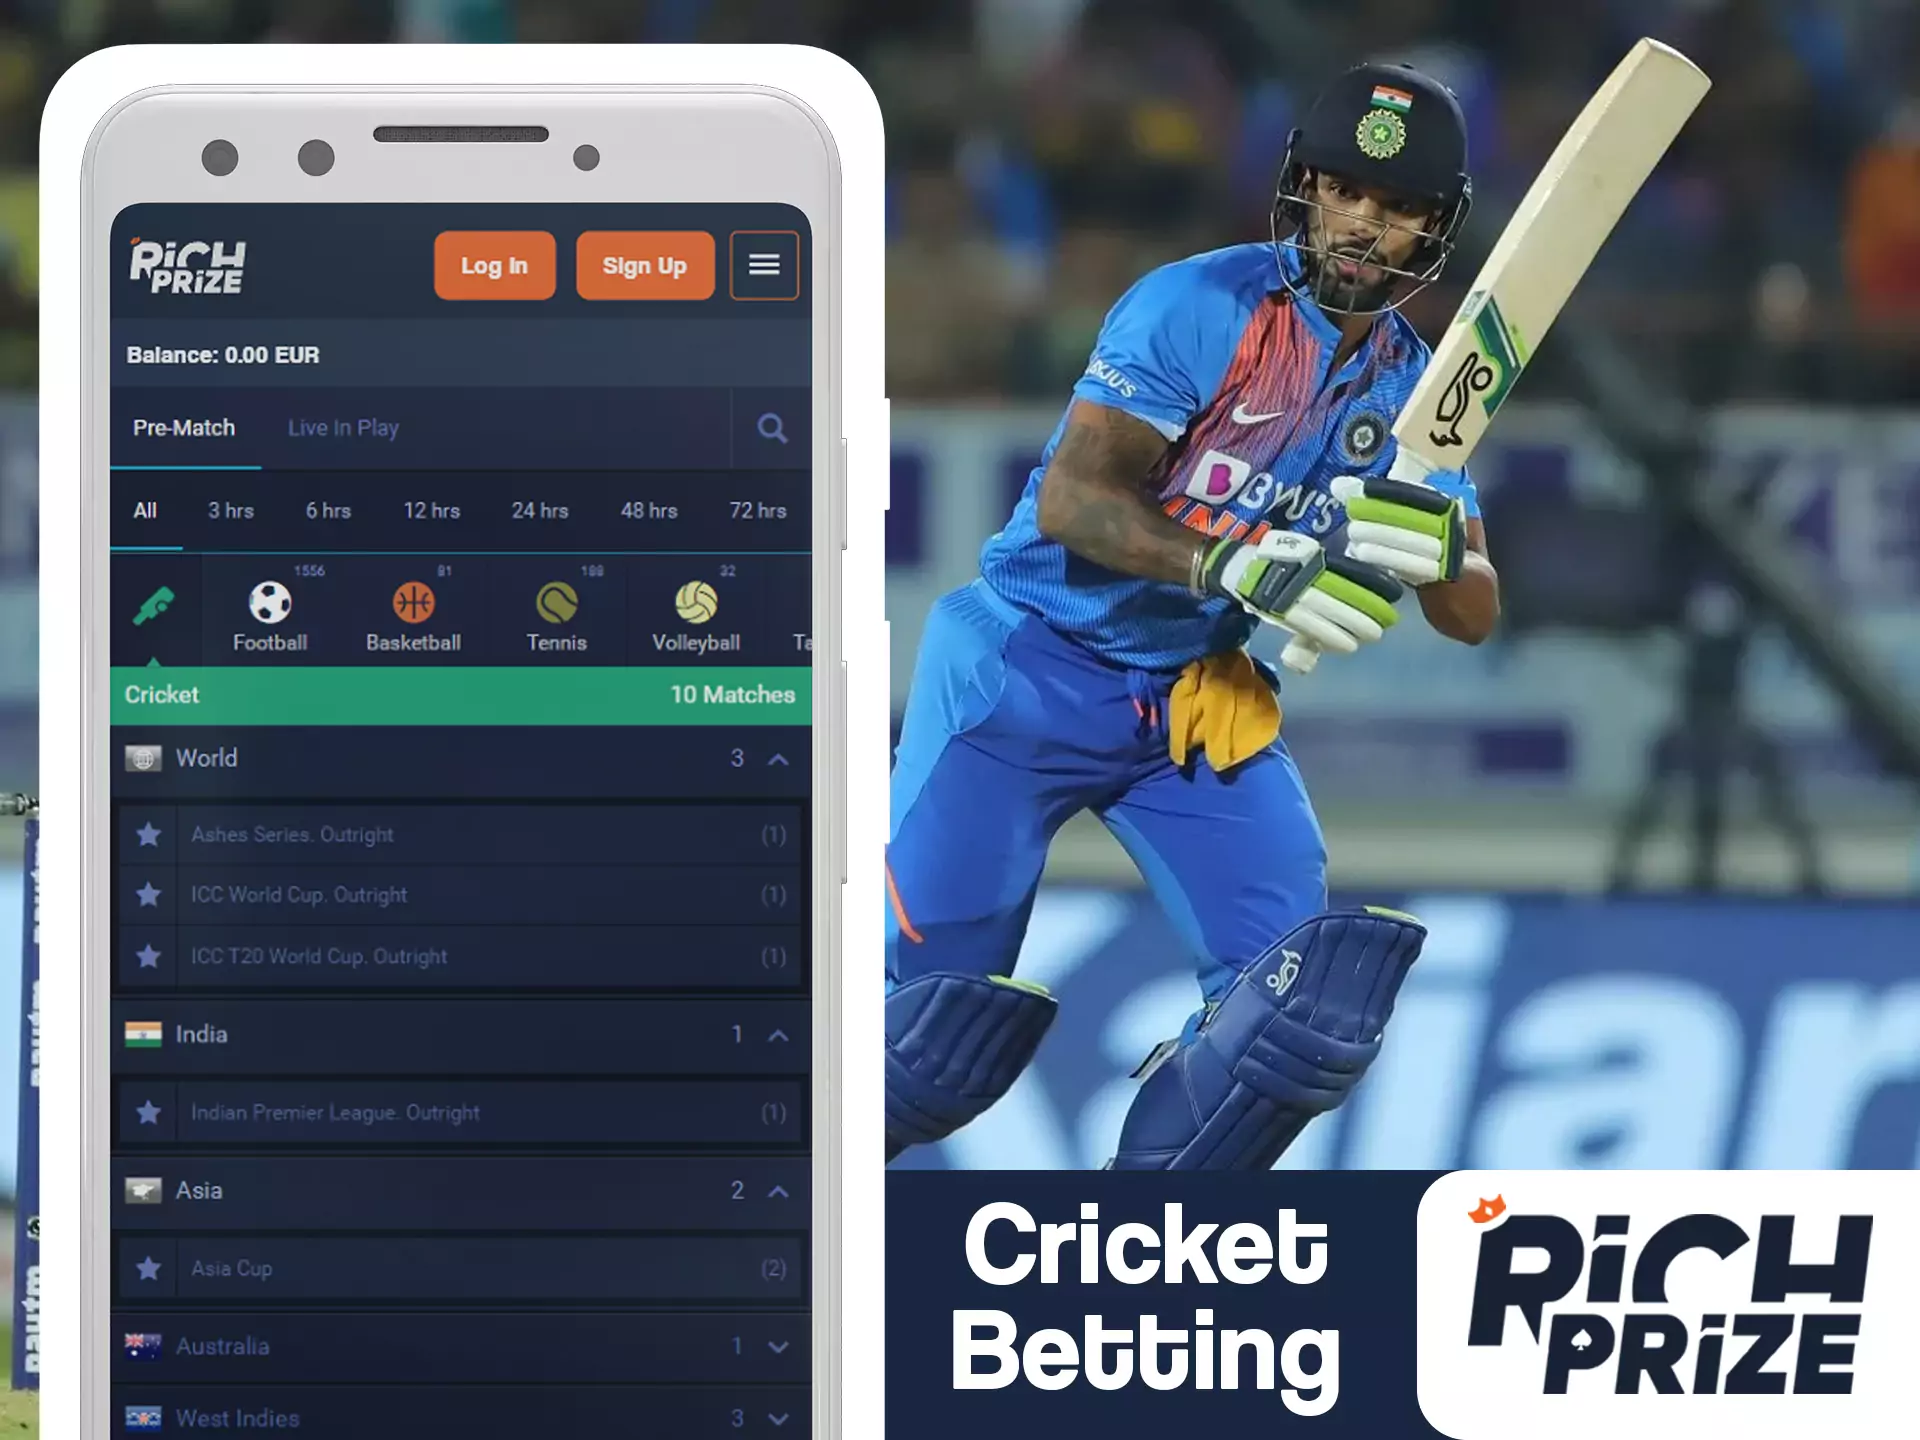 Bet on best cricket matches in RichPrize app.